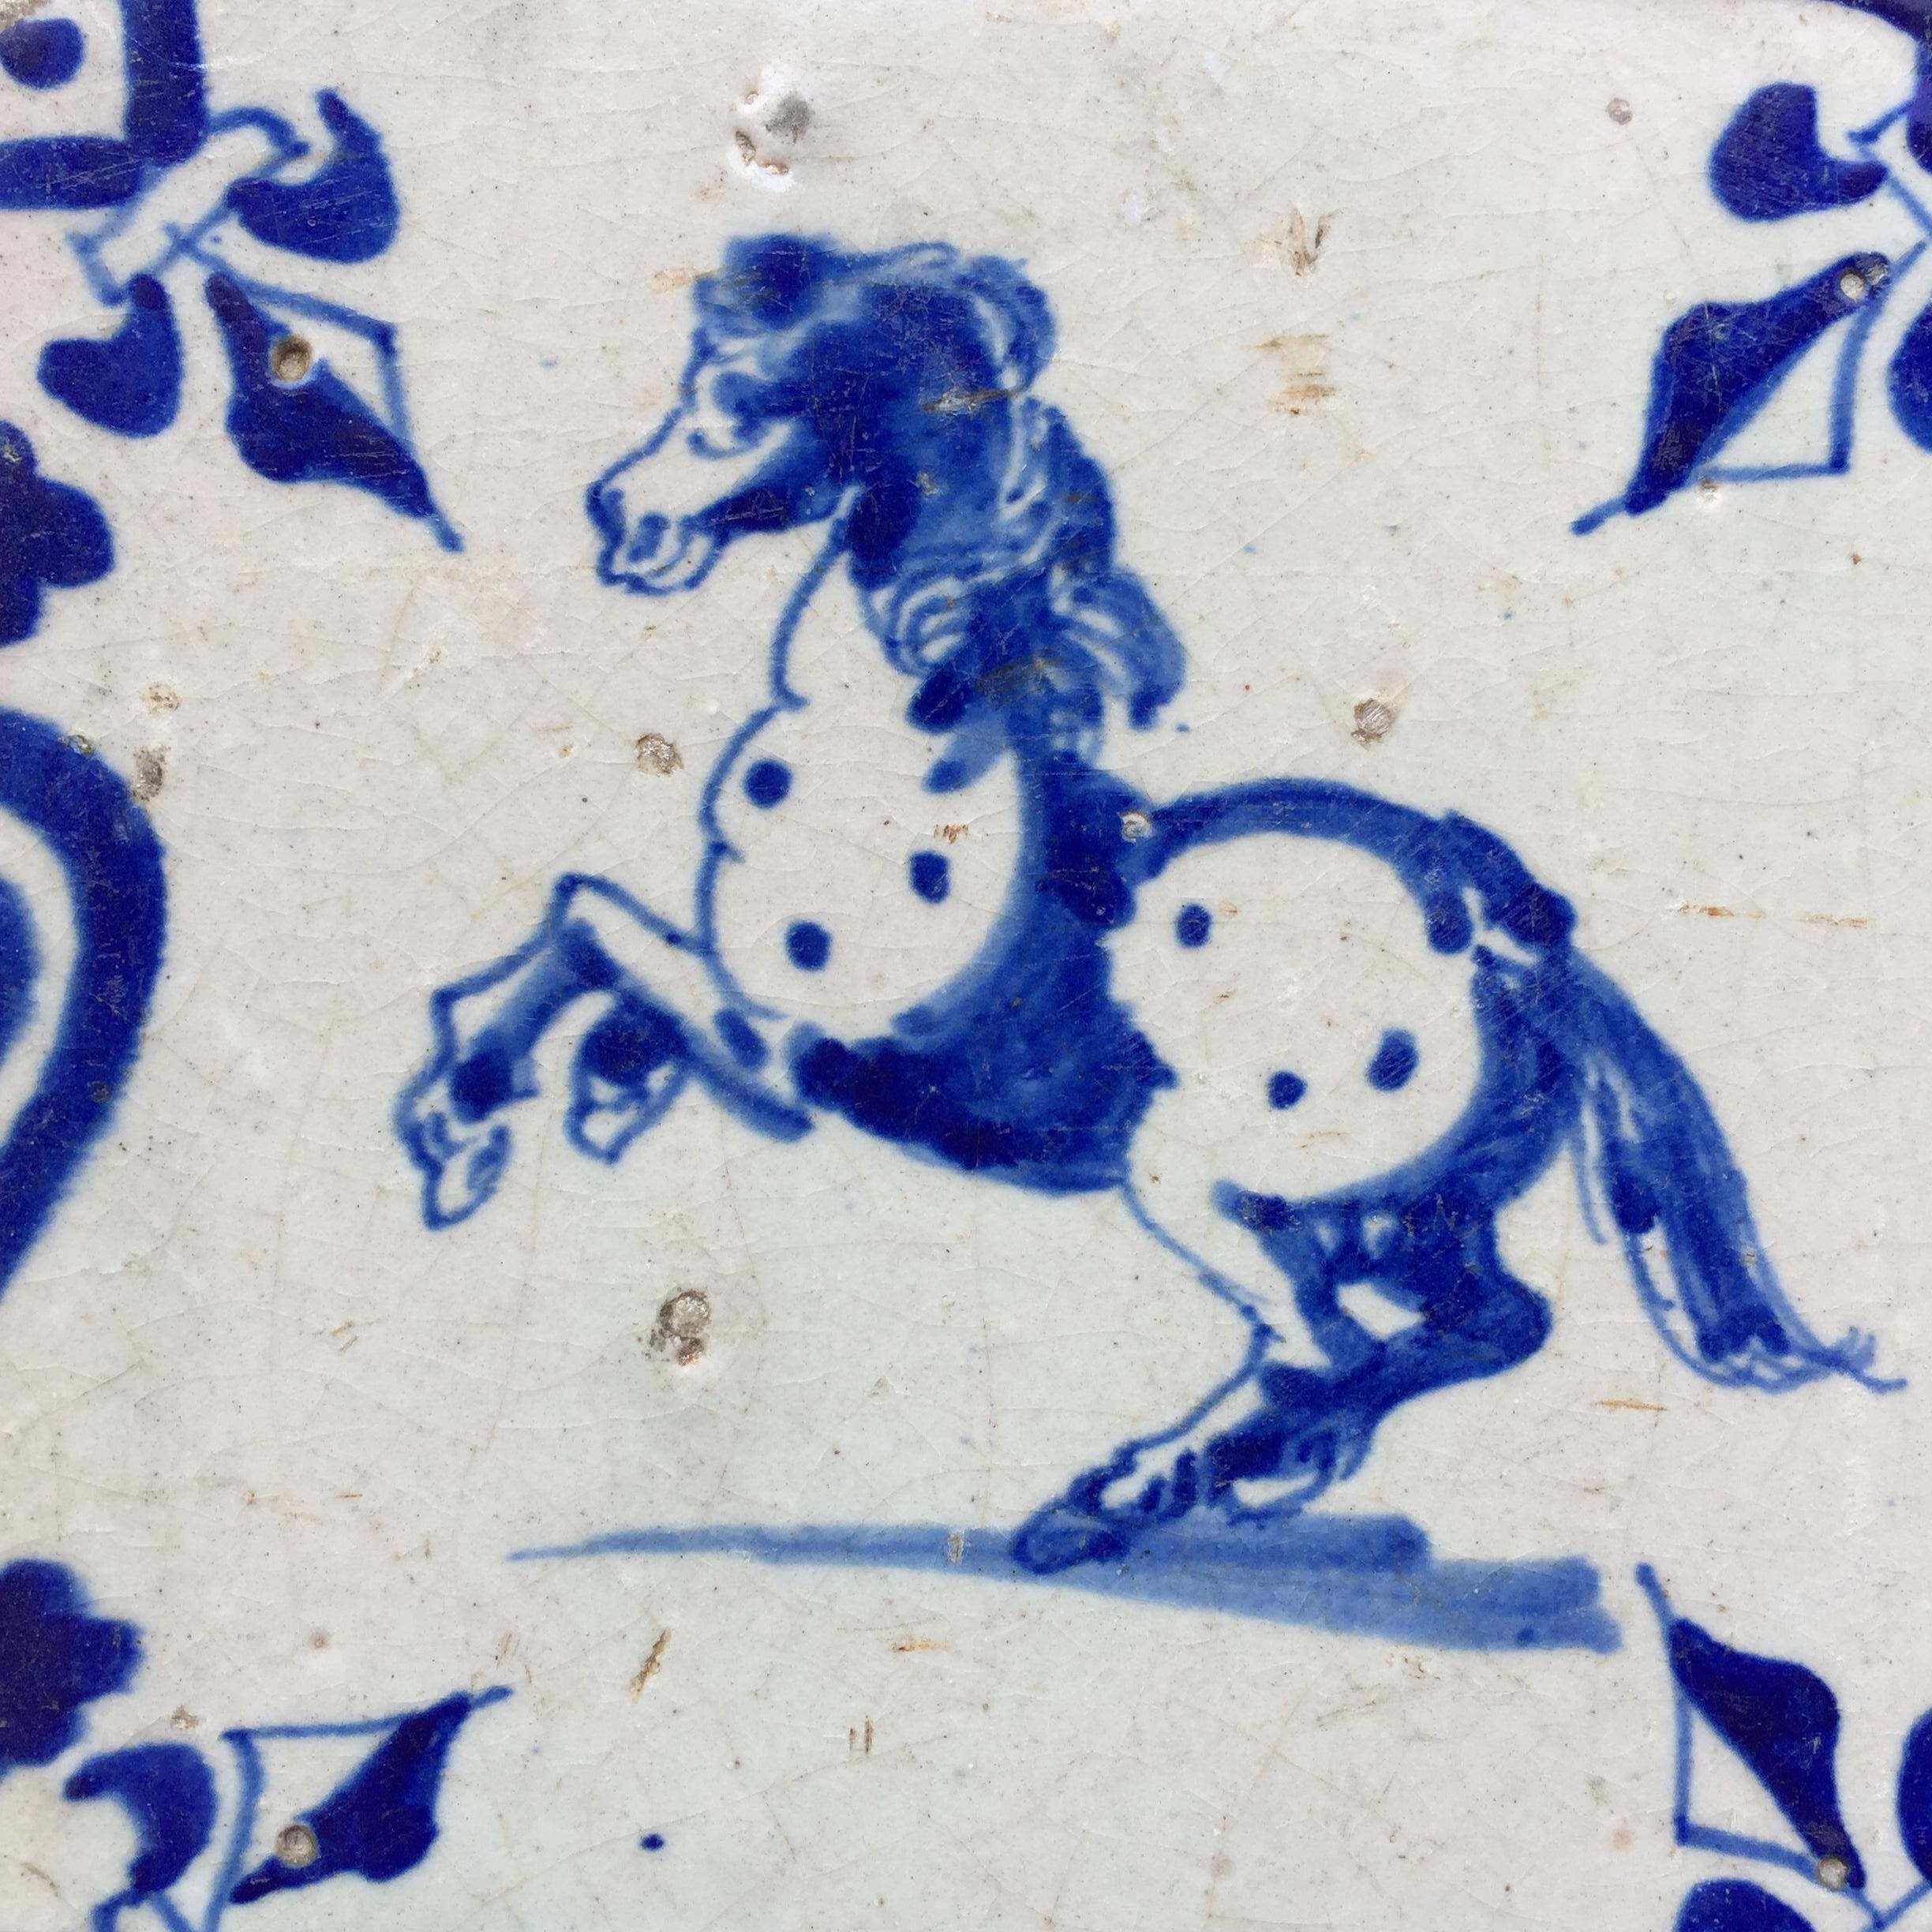 Baroque Blue and White Dutch Delft Tile with Grey Horse, Mid 17th Century